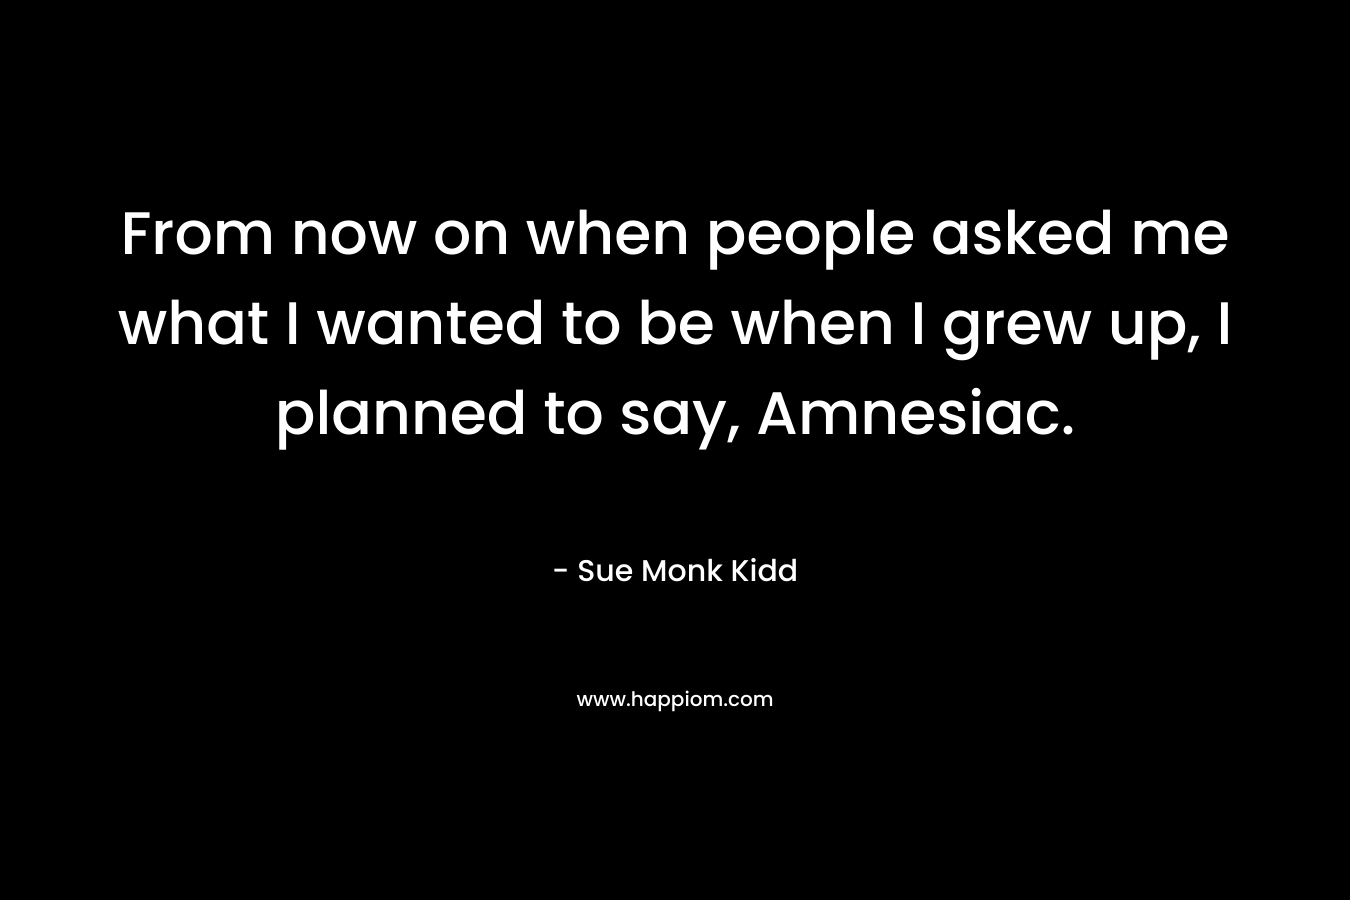 From now on when people asked me what I wanted to be when I grew up, I planned to say, Amnesiac.